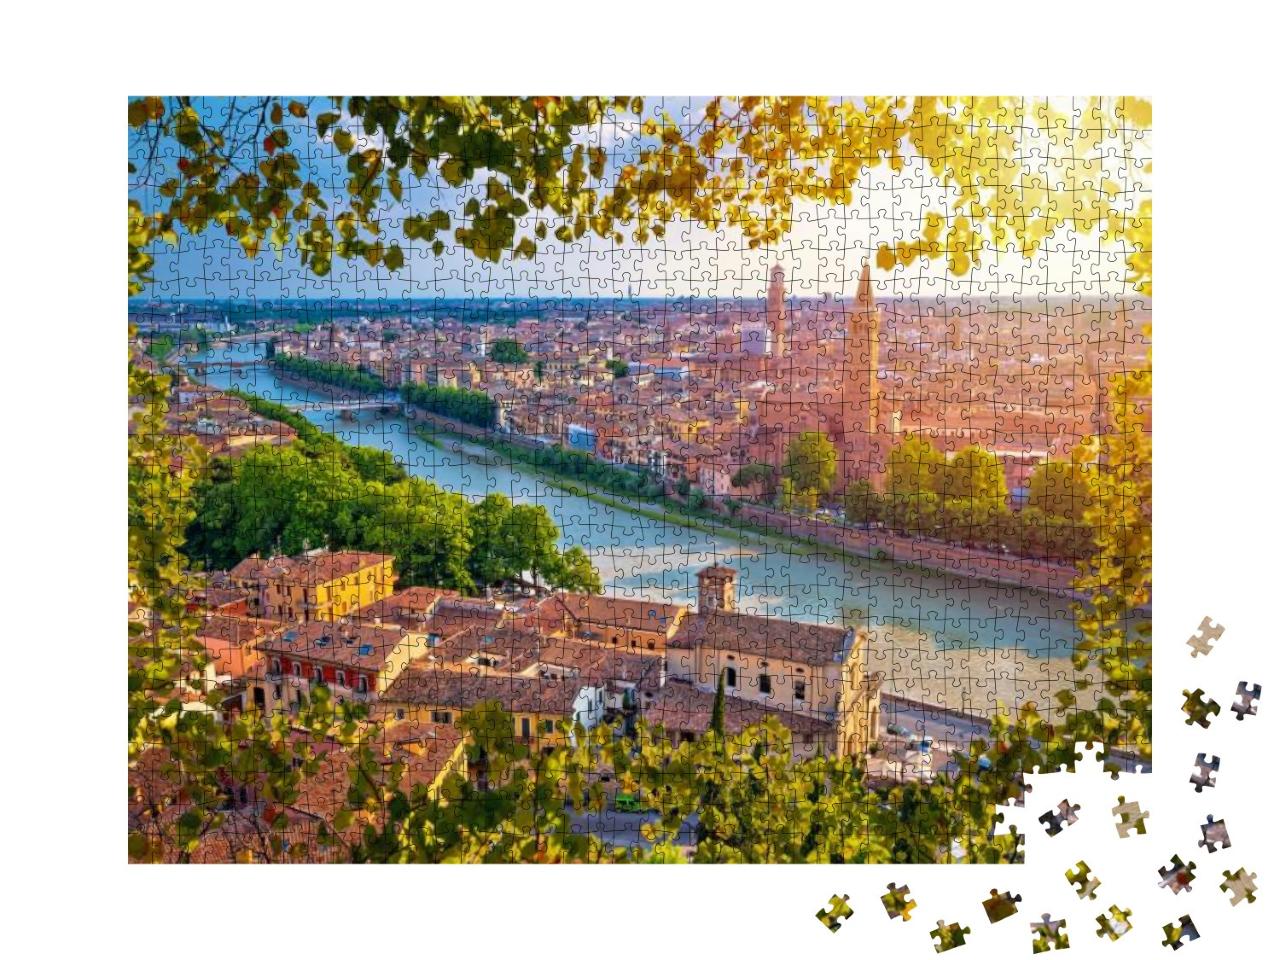 City of Verona & Adige River Aerial View Through Leaf Fra... Jigsaw Puzzle with 1000 pieces